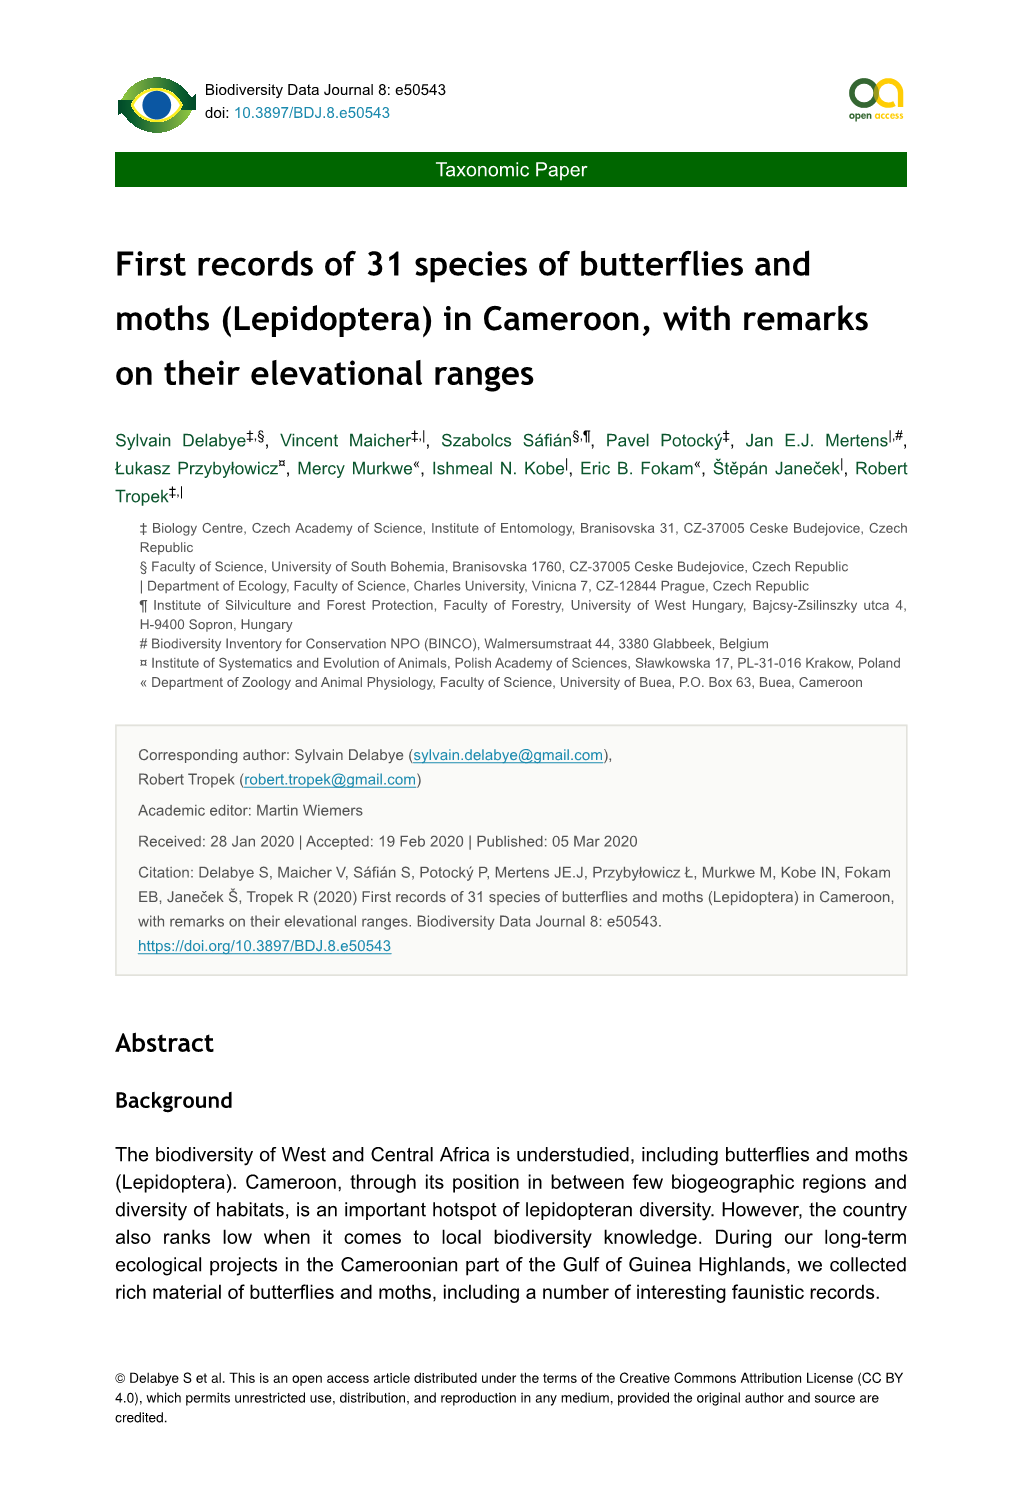 First Records of 31 Species of Butterflies and Moths (Lepidoptera) in Cameroon, with Remarks on Their Elevational Ranges